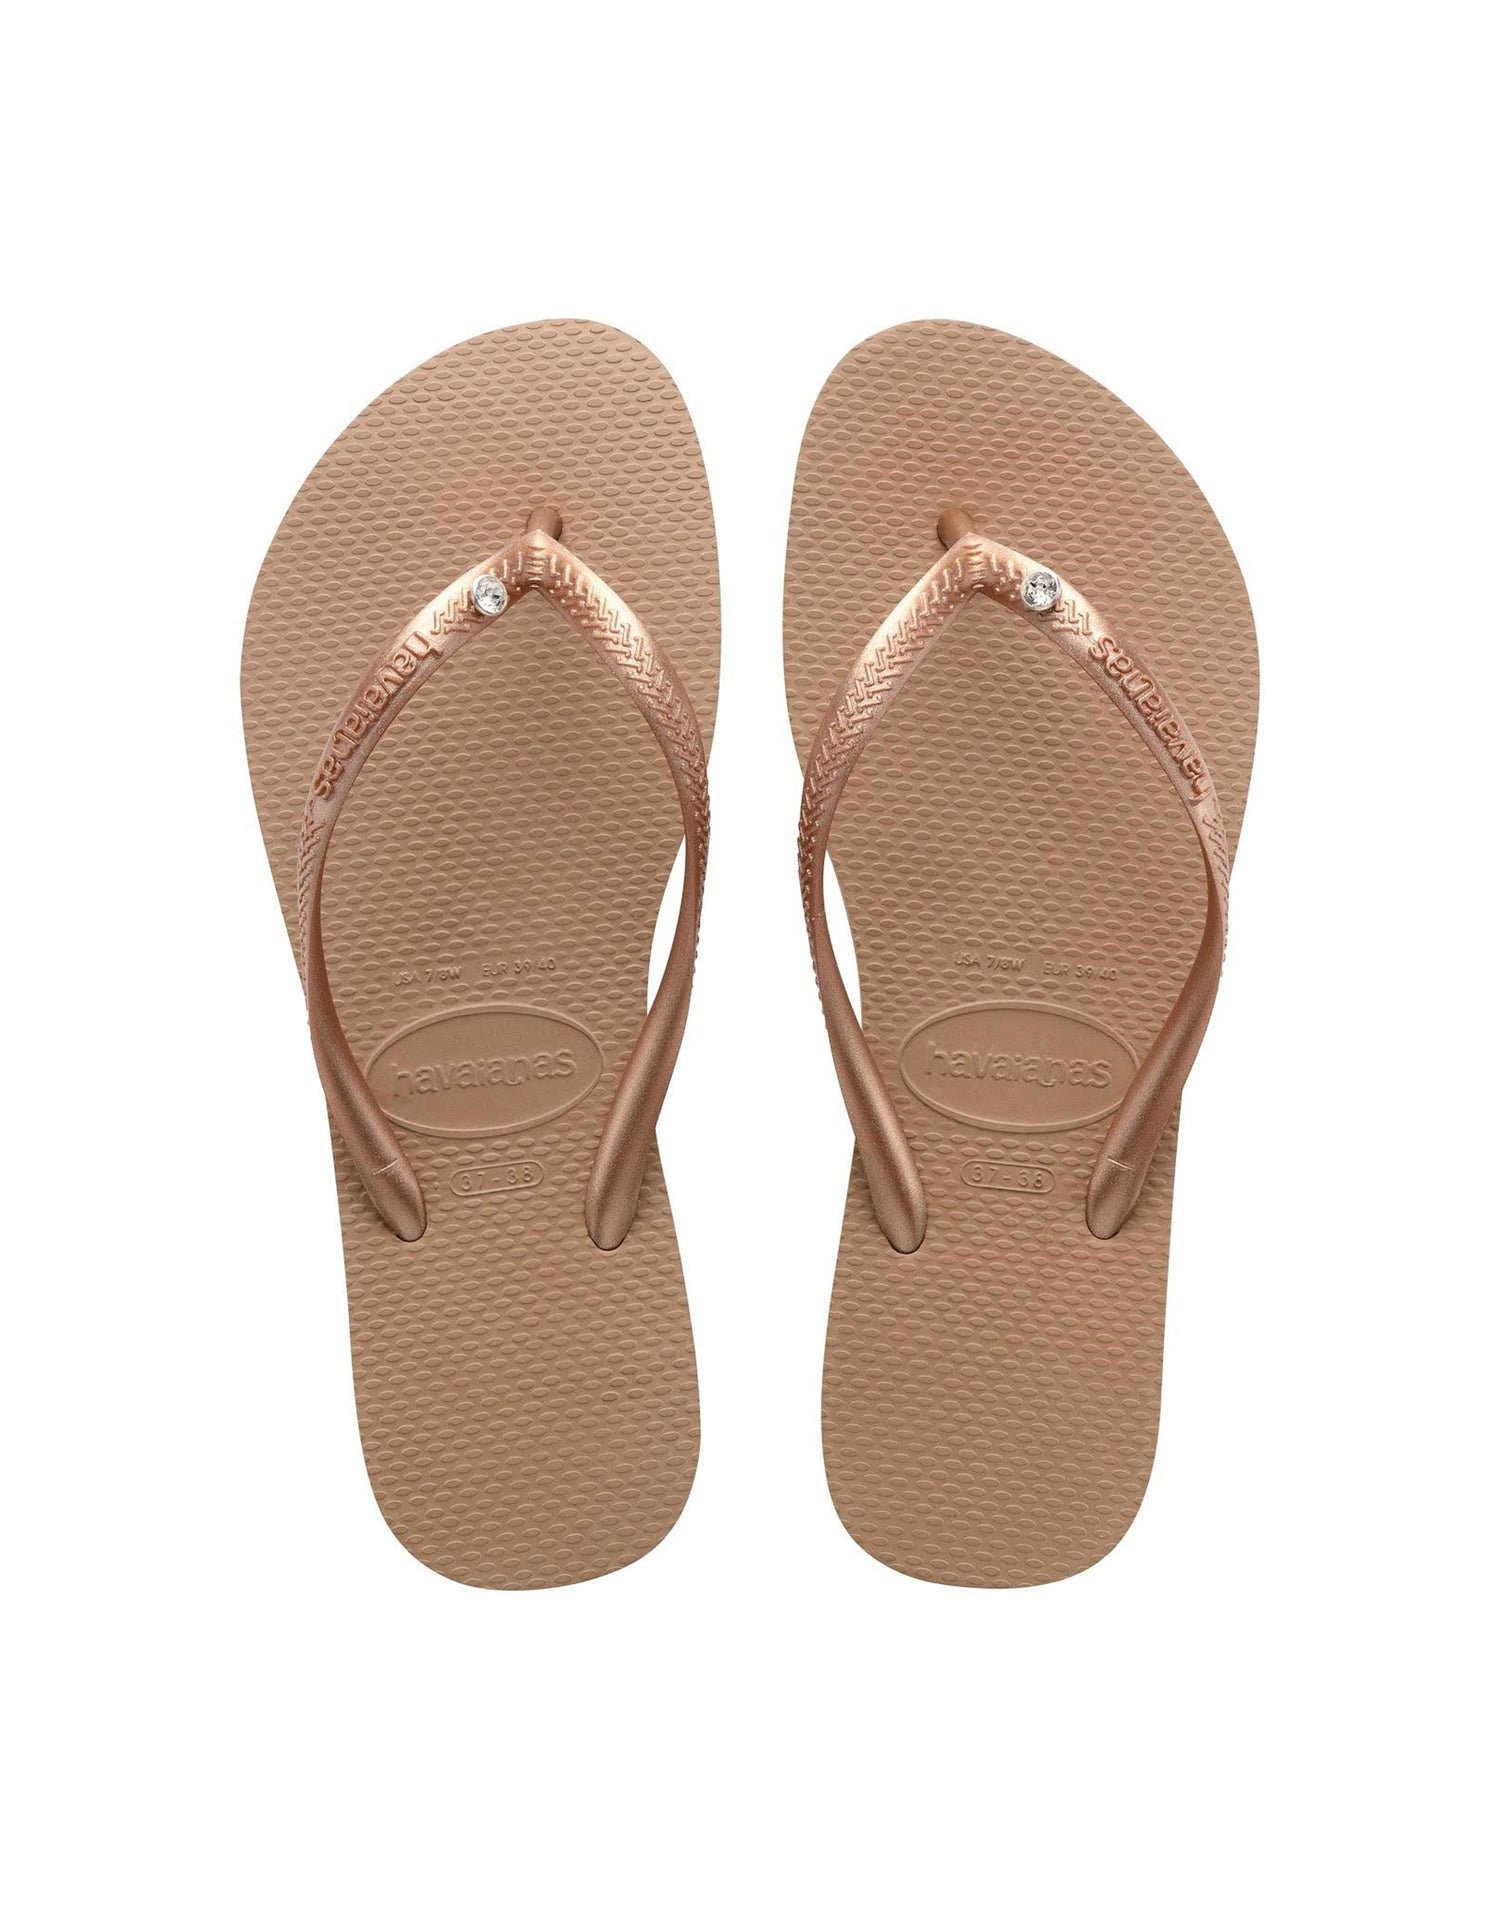 Slim Crystal SW II Sandals by Havaianas in Rose Gold - Front View